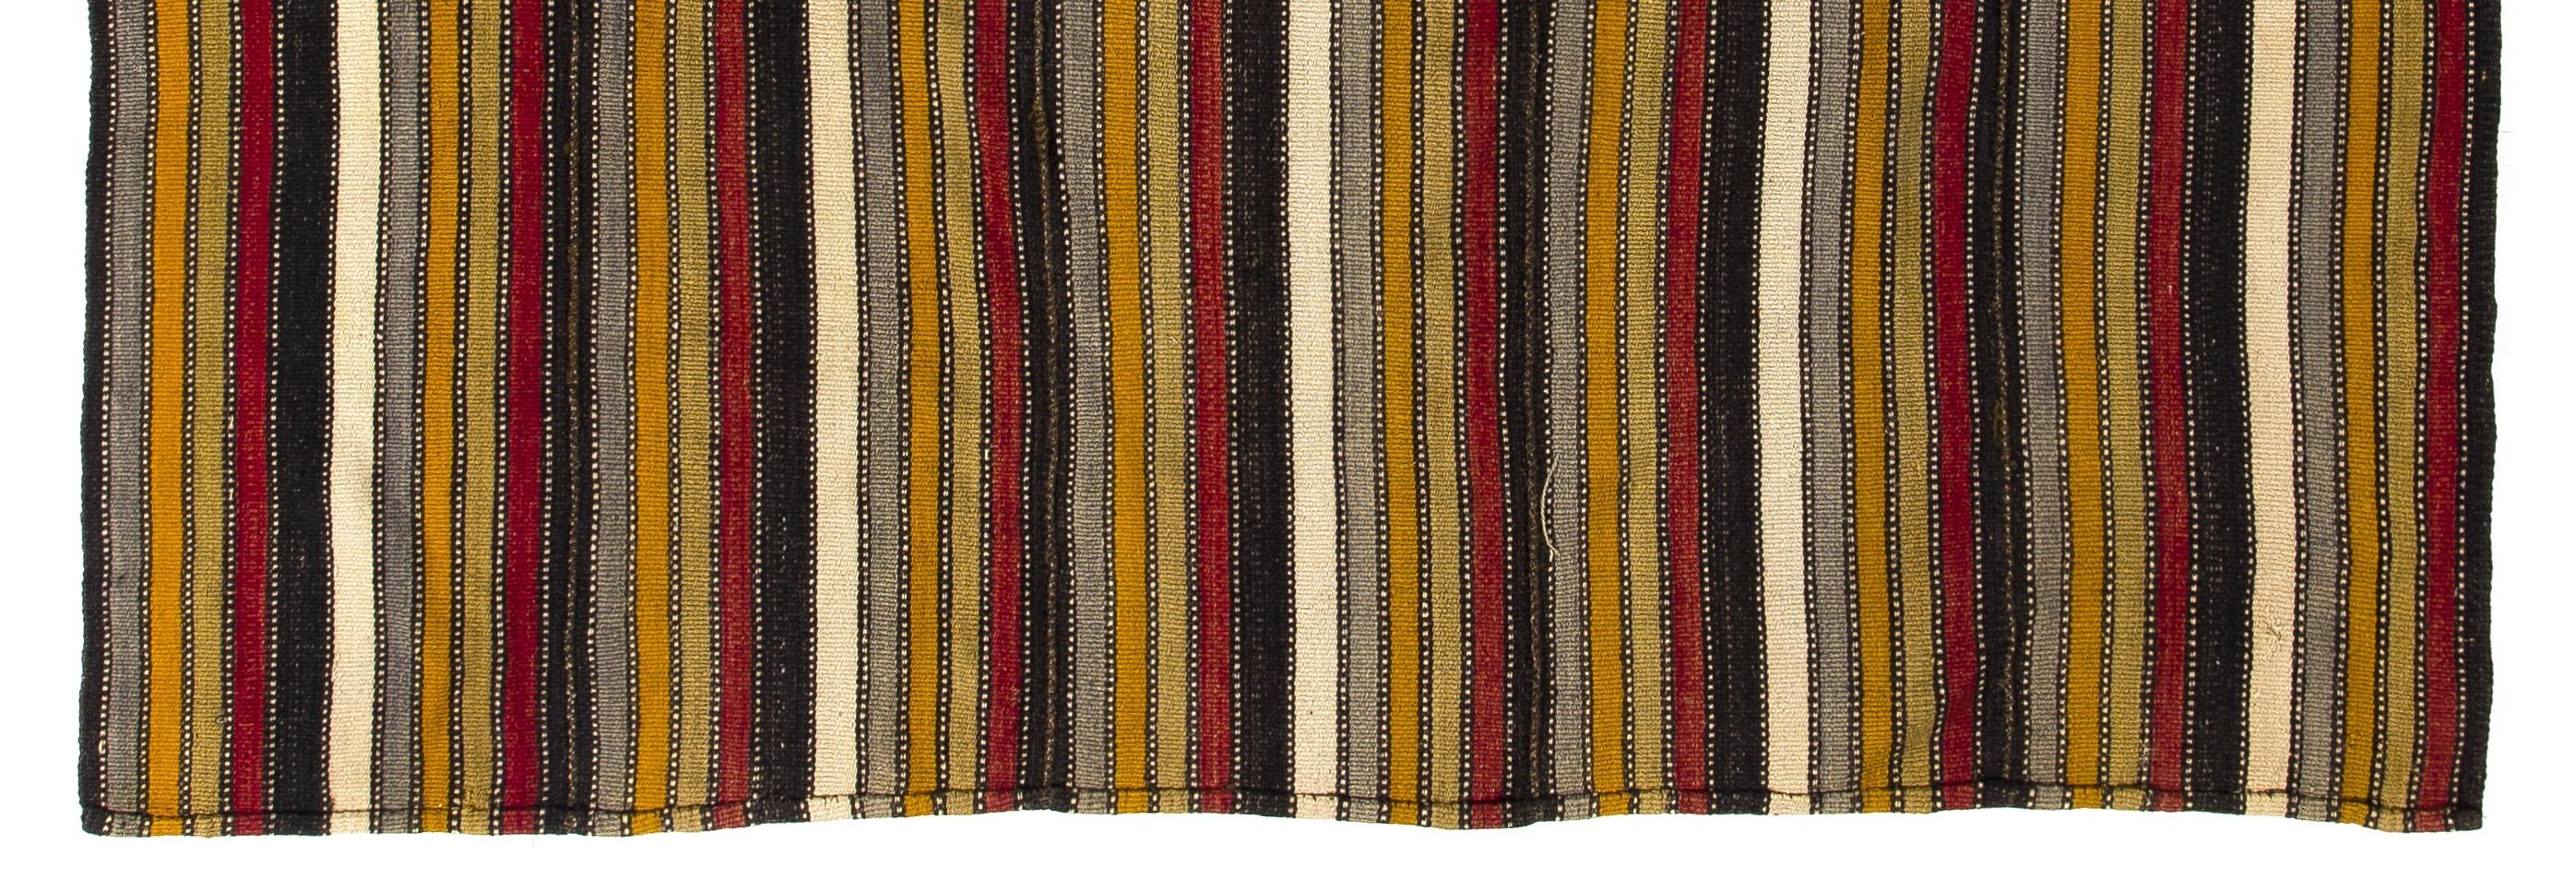 Hand-Woven 5.7x5.9 ft Handwoven Striped Vintage Kilim Rug, Flat-Weave Wool Floor Covering For Sale